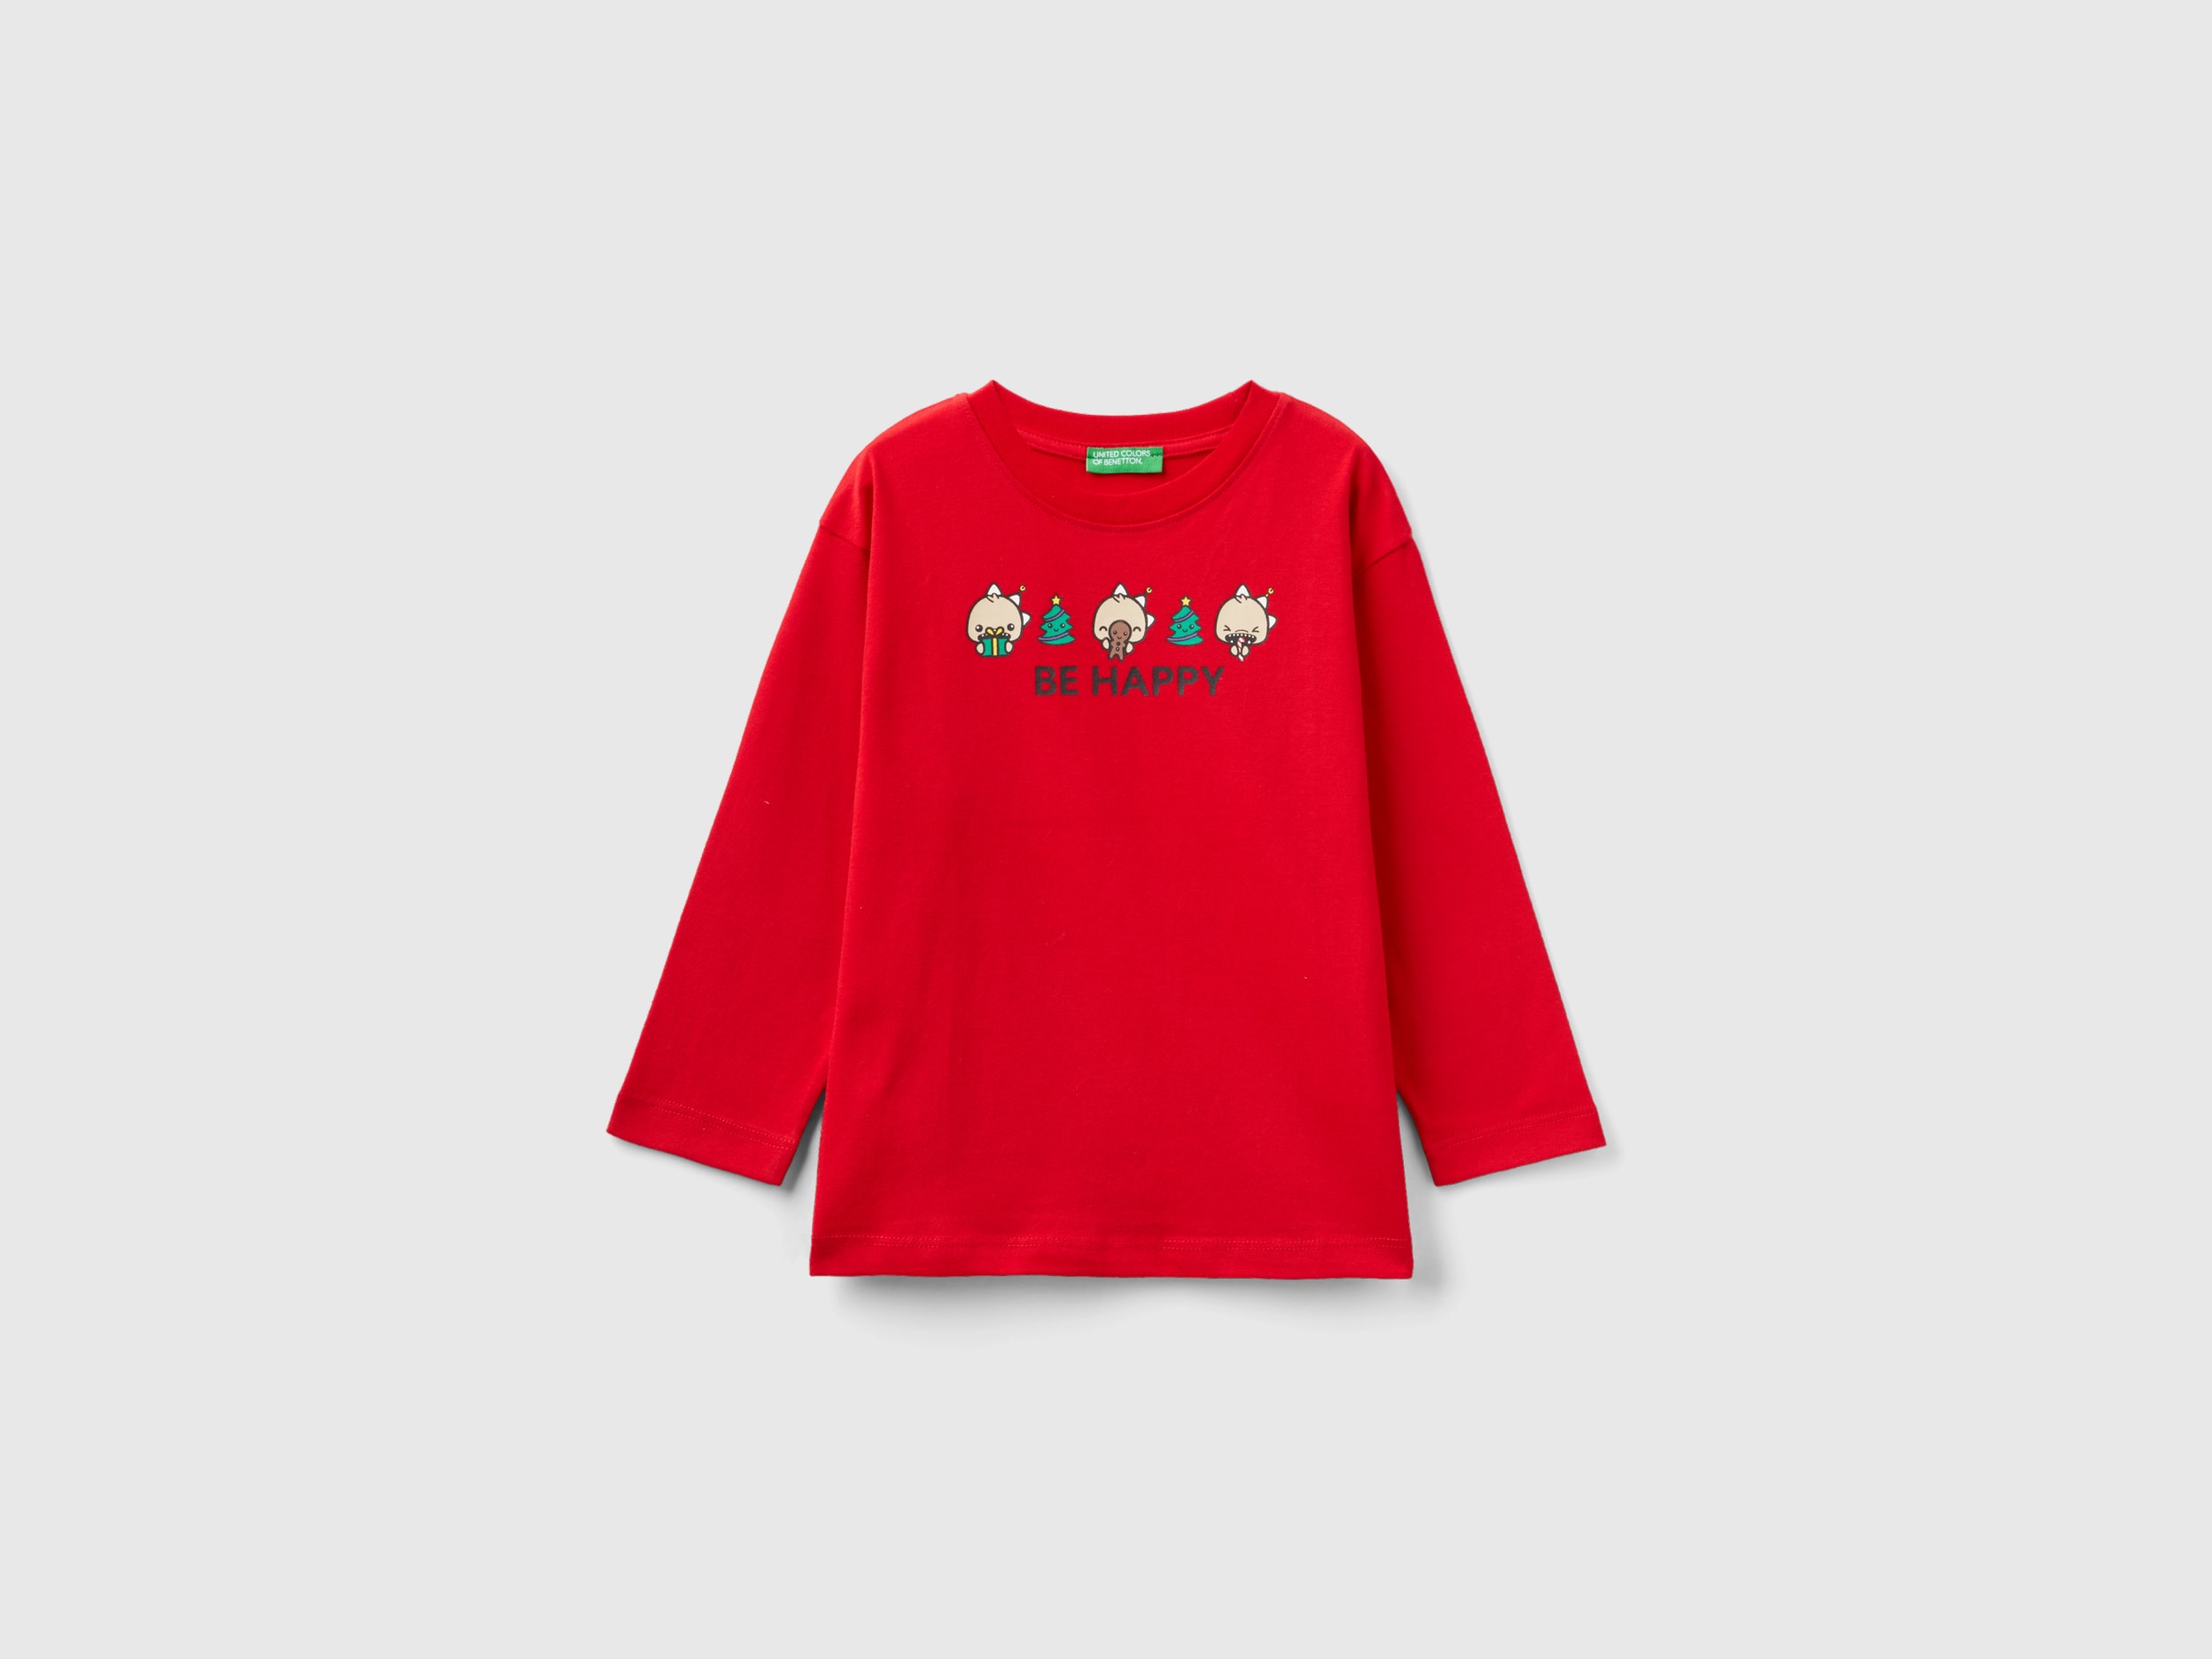 Benetton, Warm T-shirt With Christmas Print, size 3-4, Red, Kids